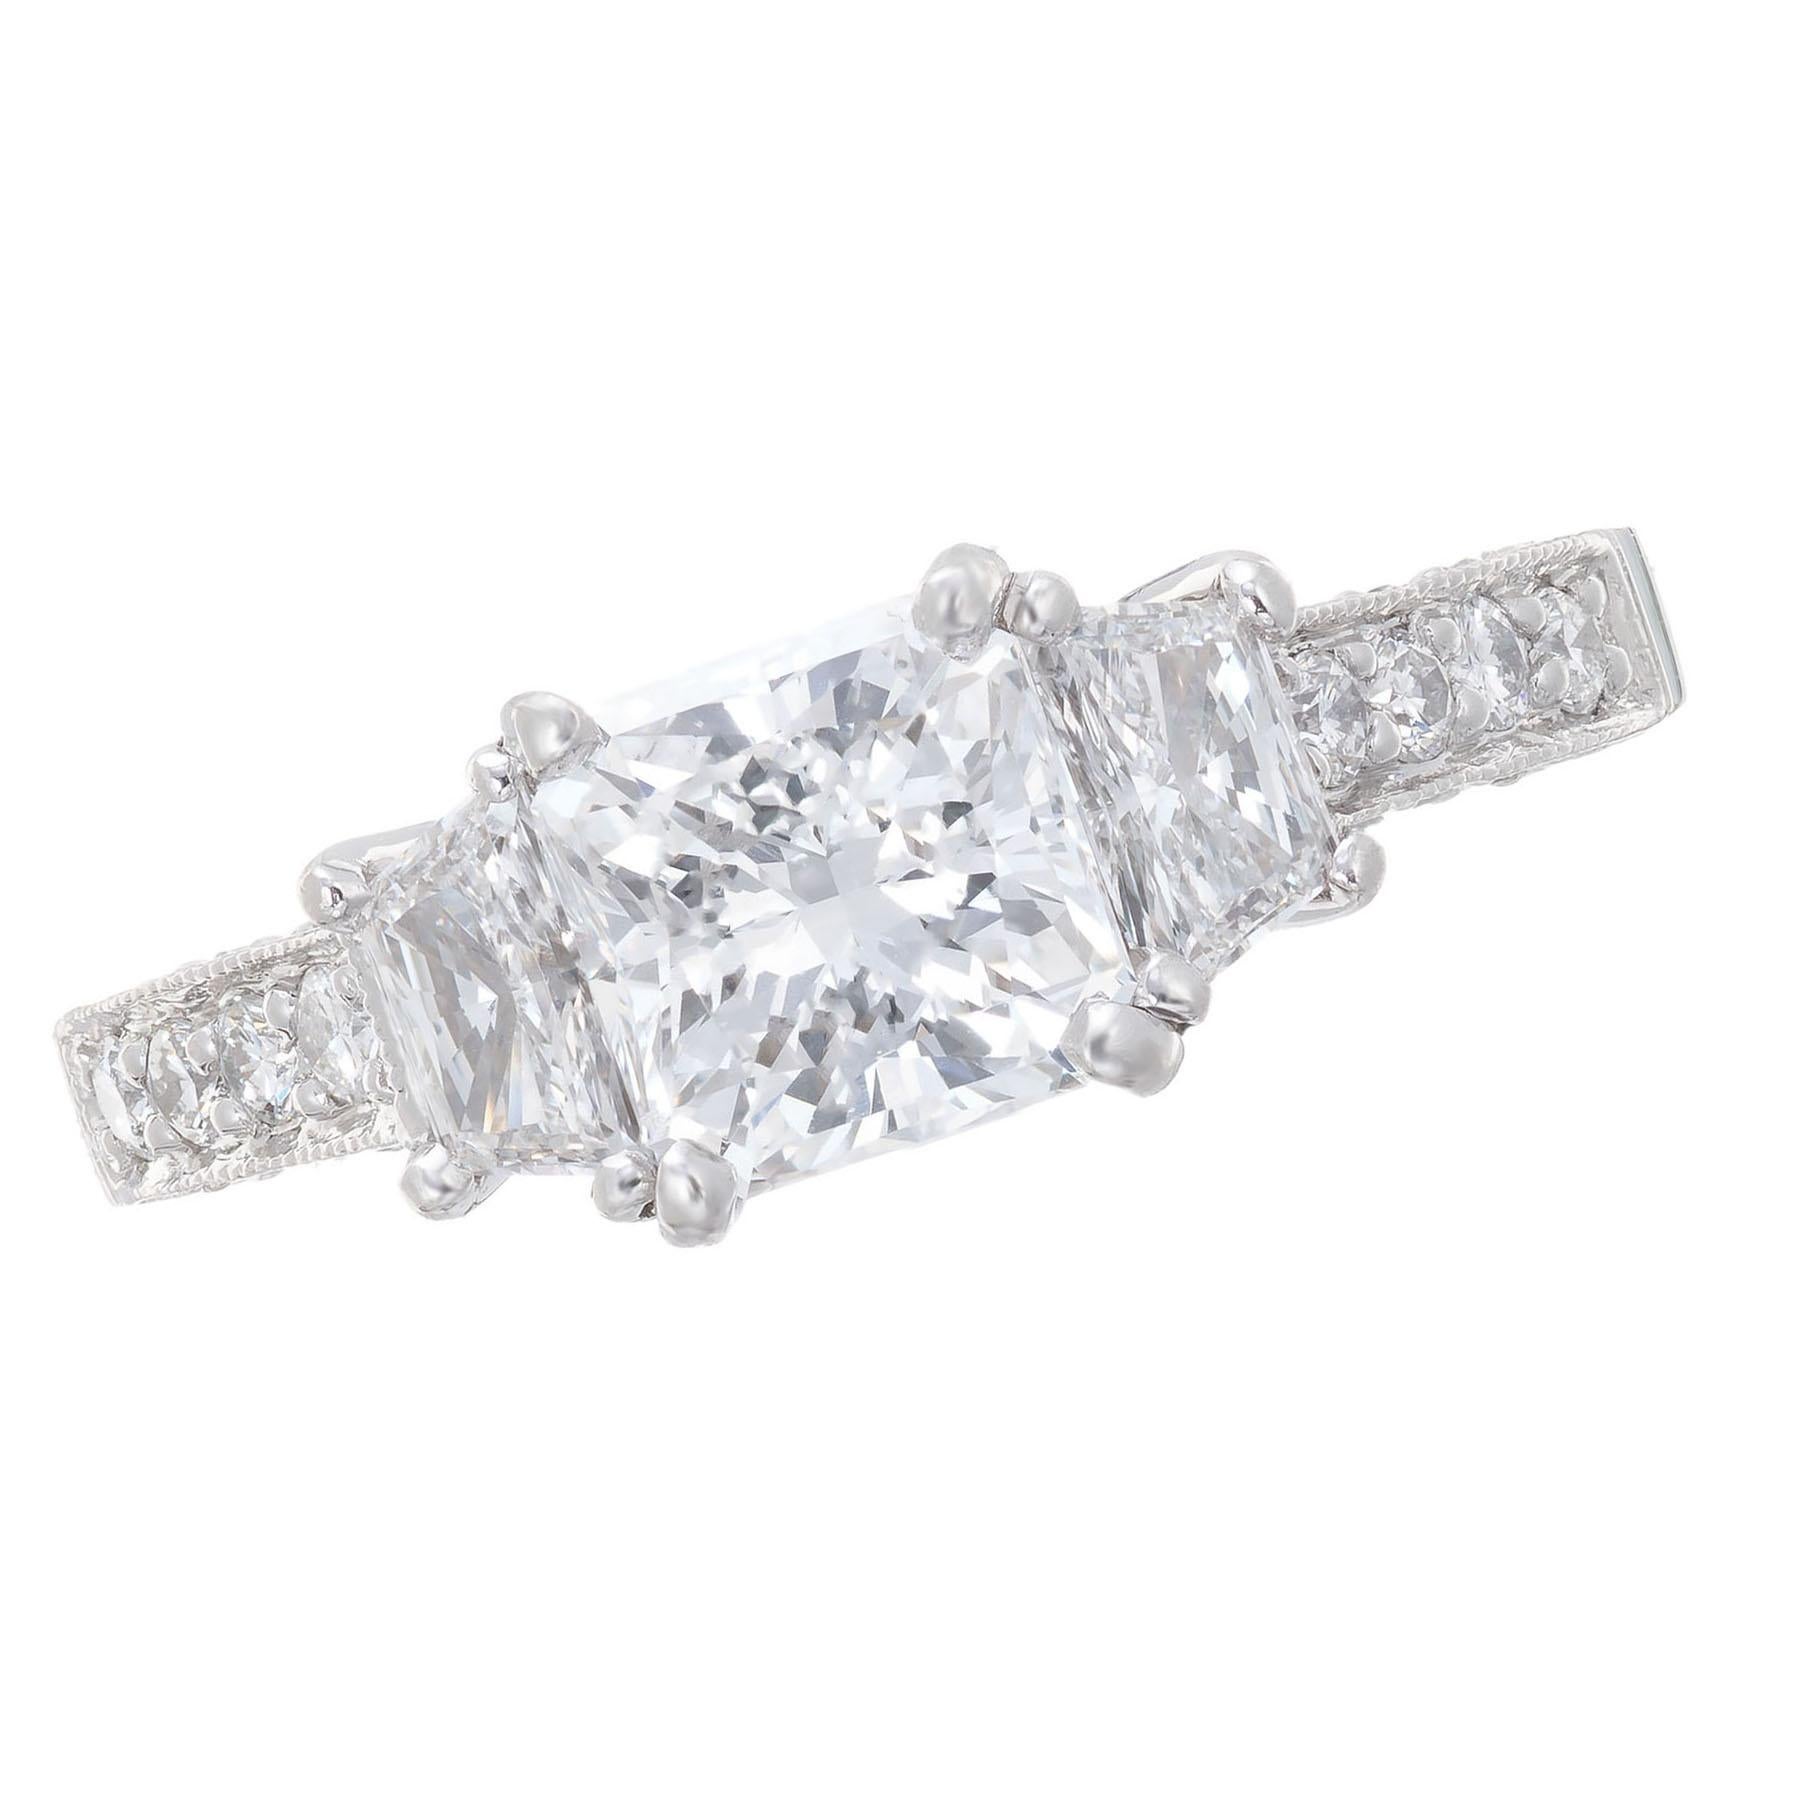 Original Martin Flyer Diamond Platinum three-stone Engagement ring. GIA certified center radiant cut diamond with 2 trapezoid side diamonds. Pave set diamonds along the shoulders and sides. 

1 radiant cut 1.22cts, diamond¸I1, F, VS2. GIA